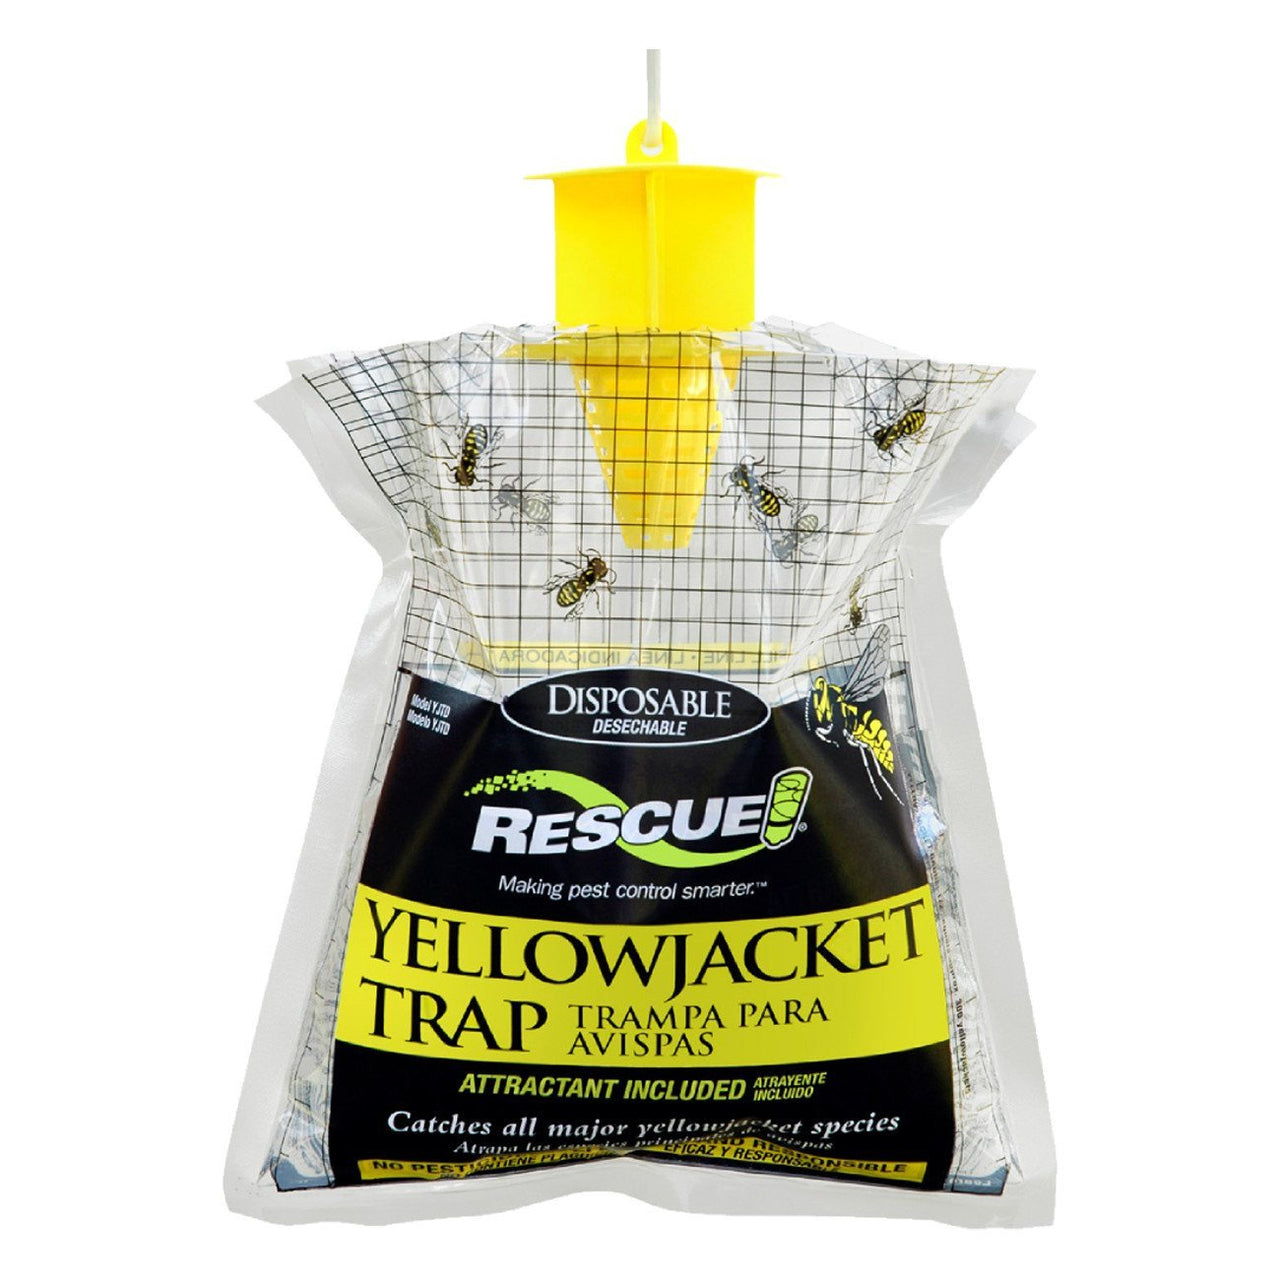 Rescue! Yellow Jacket Disposable Bag Trap